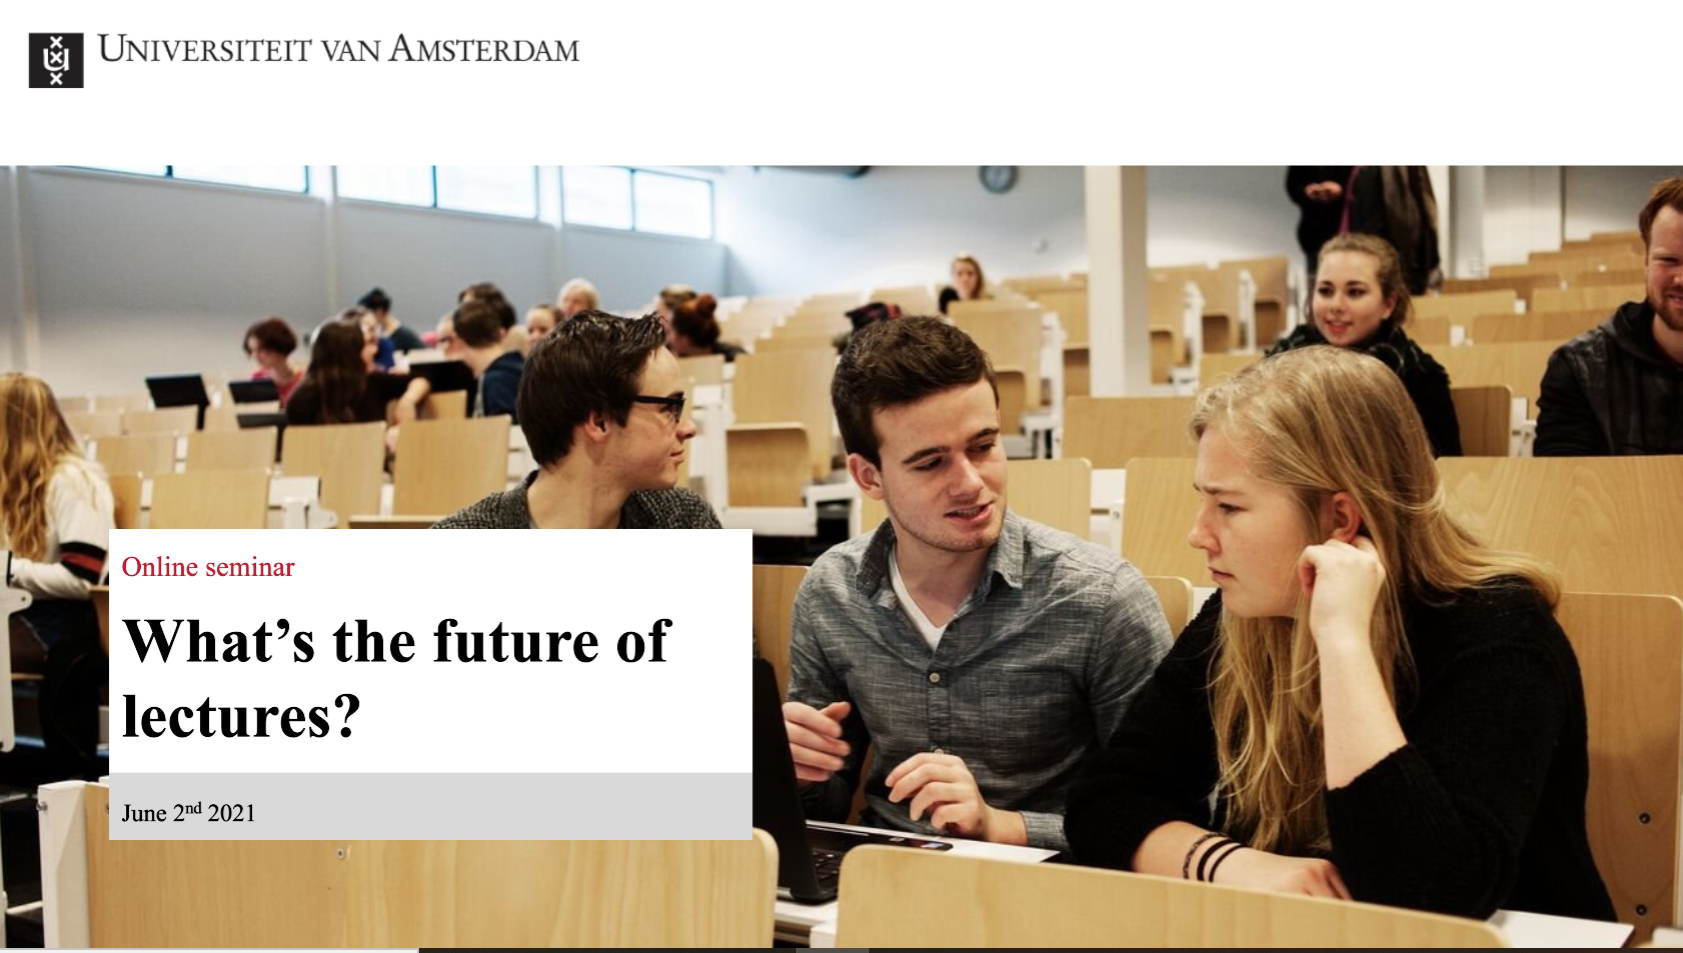 Seminar 'What's the future of lectures?'- June 2nd 2021